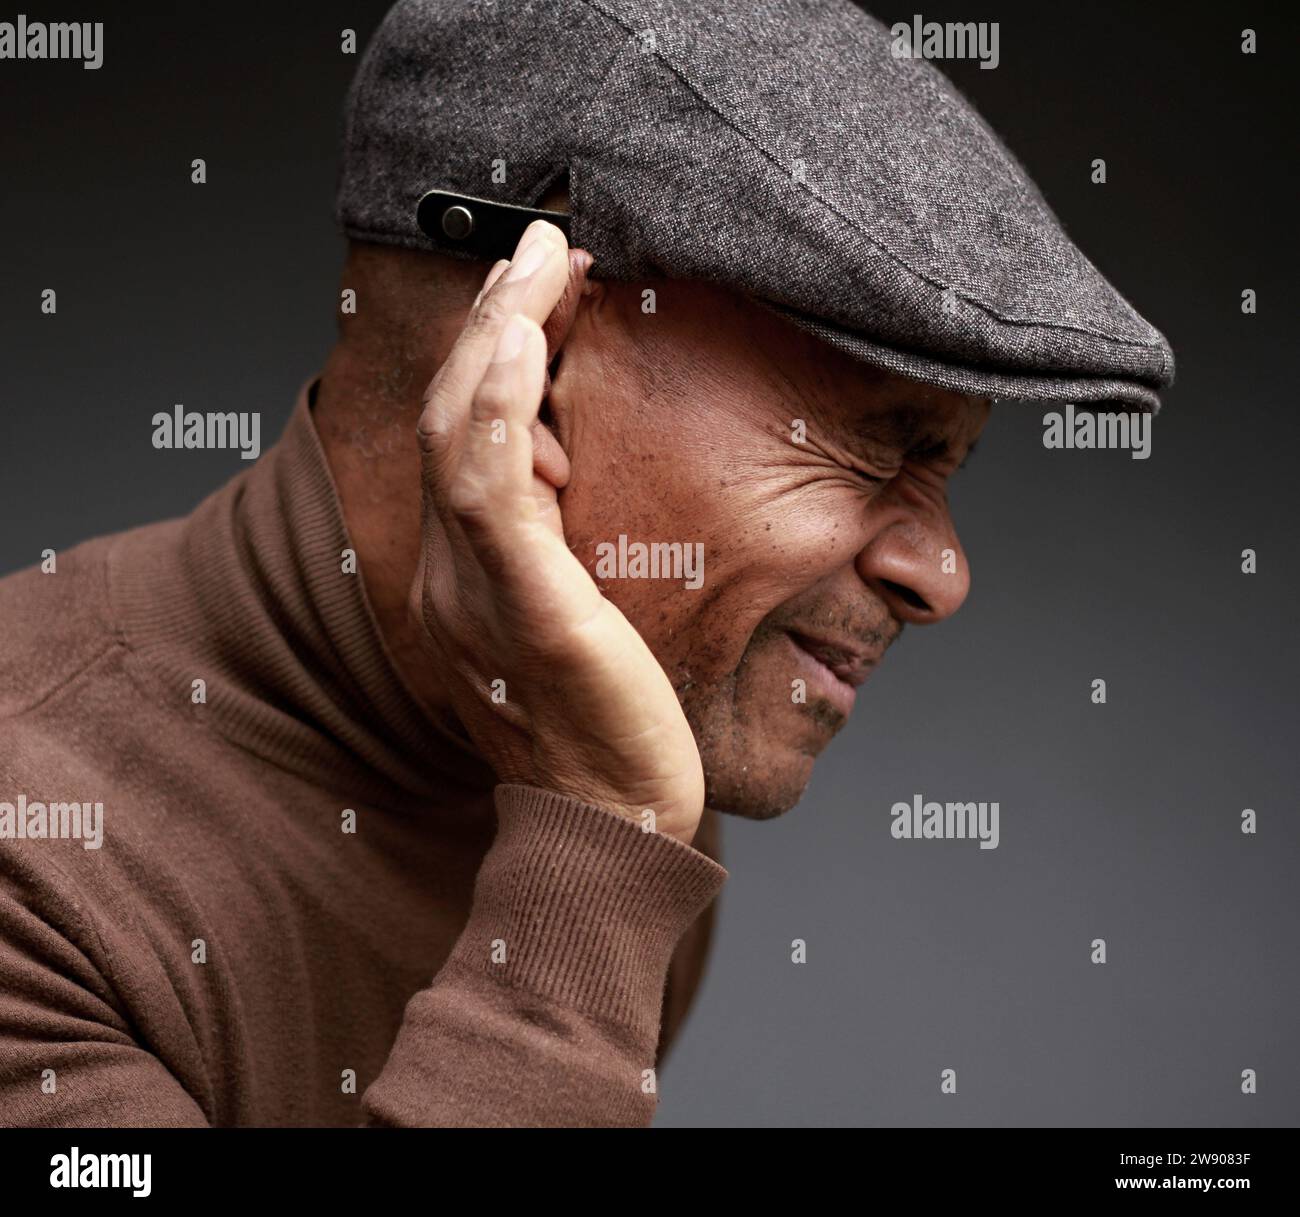 deafness suffering from hearing loss on grey black background with people stock image stock photo Stock Photo